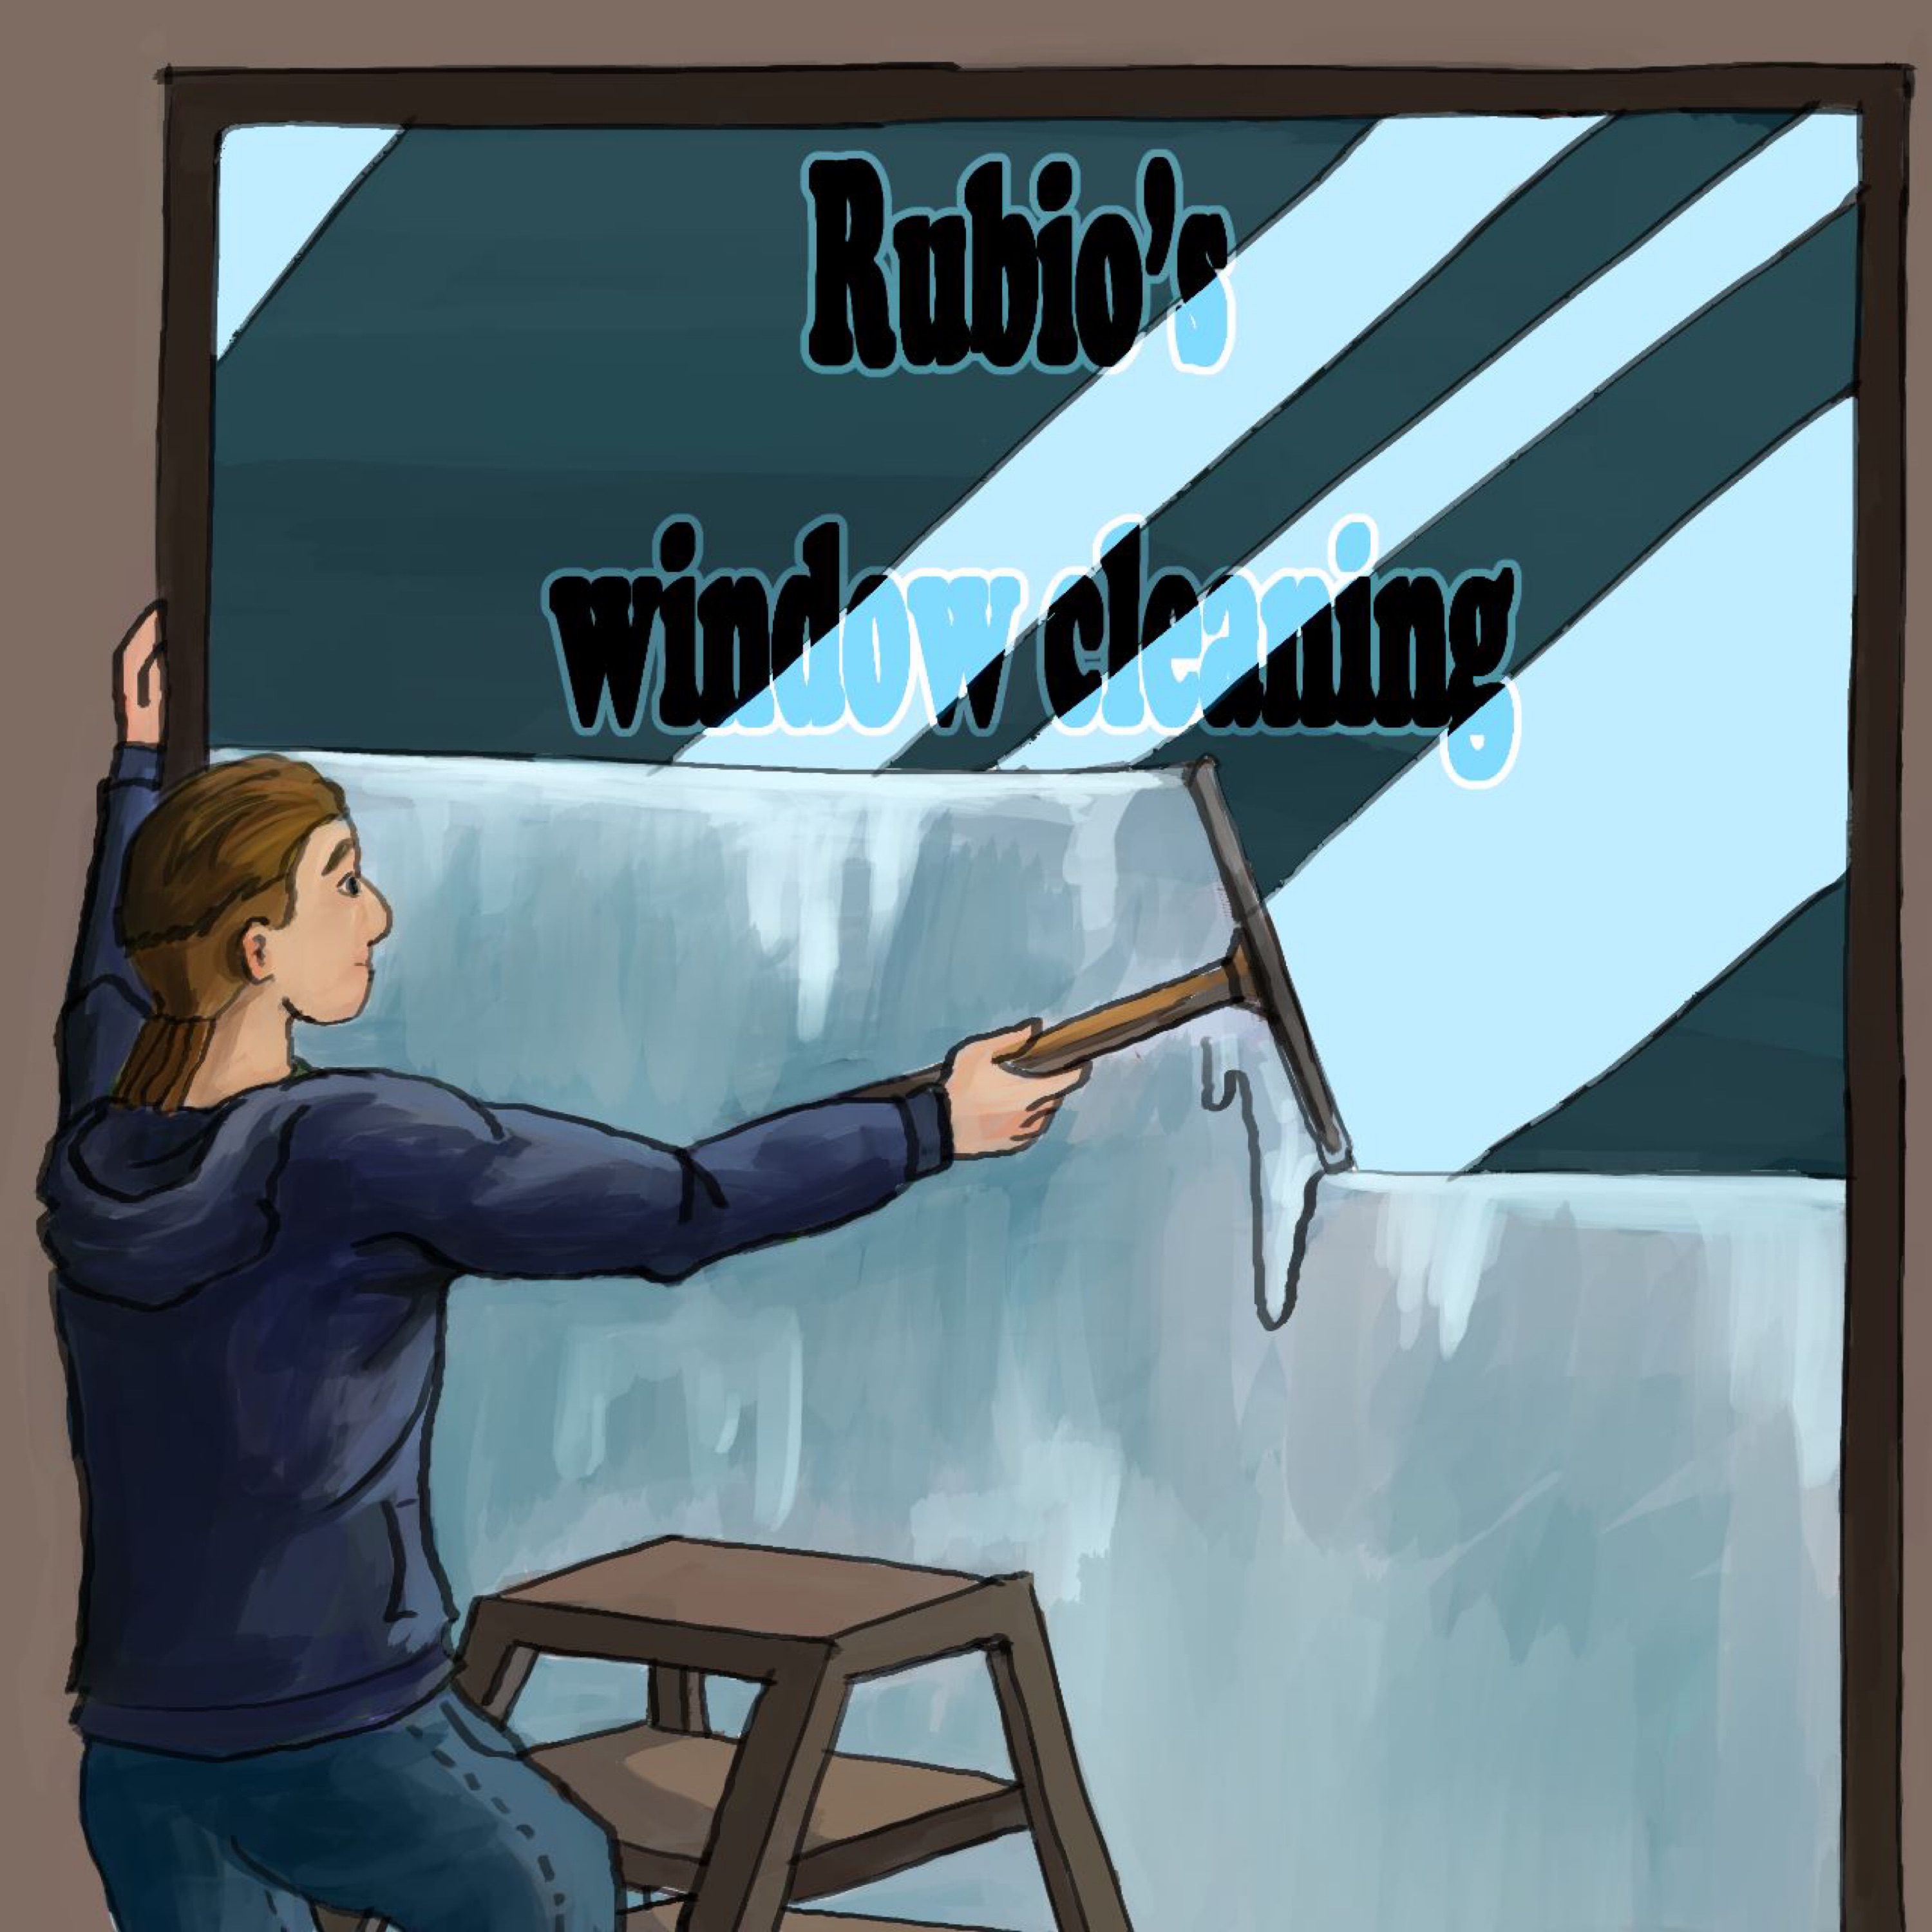 Rubios Window Cleaning - Unlicensed Contractor Logo